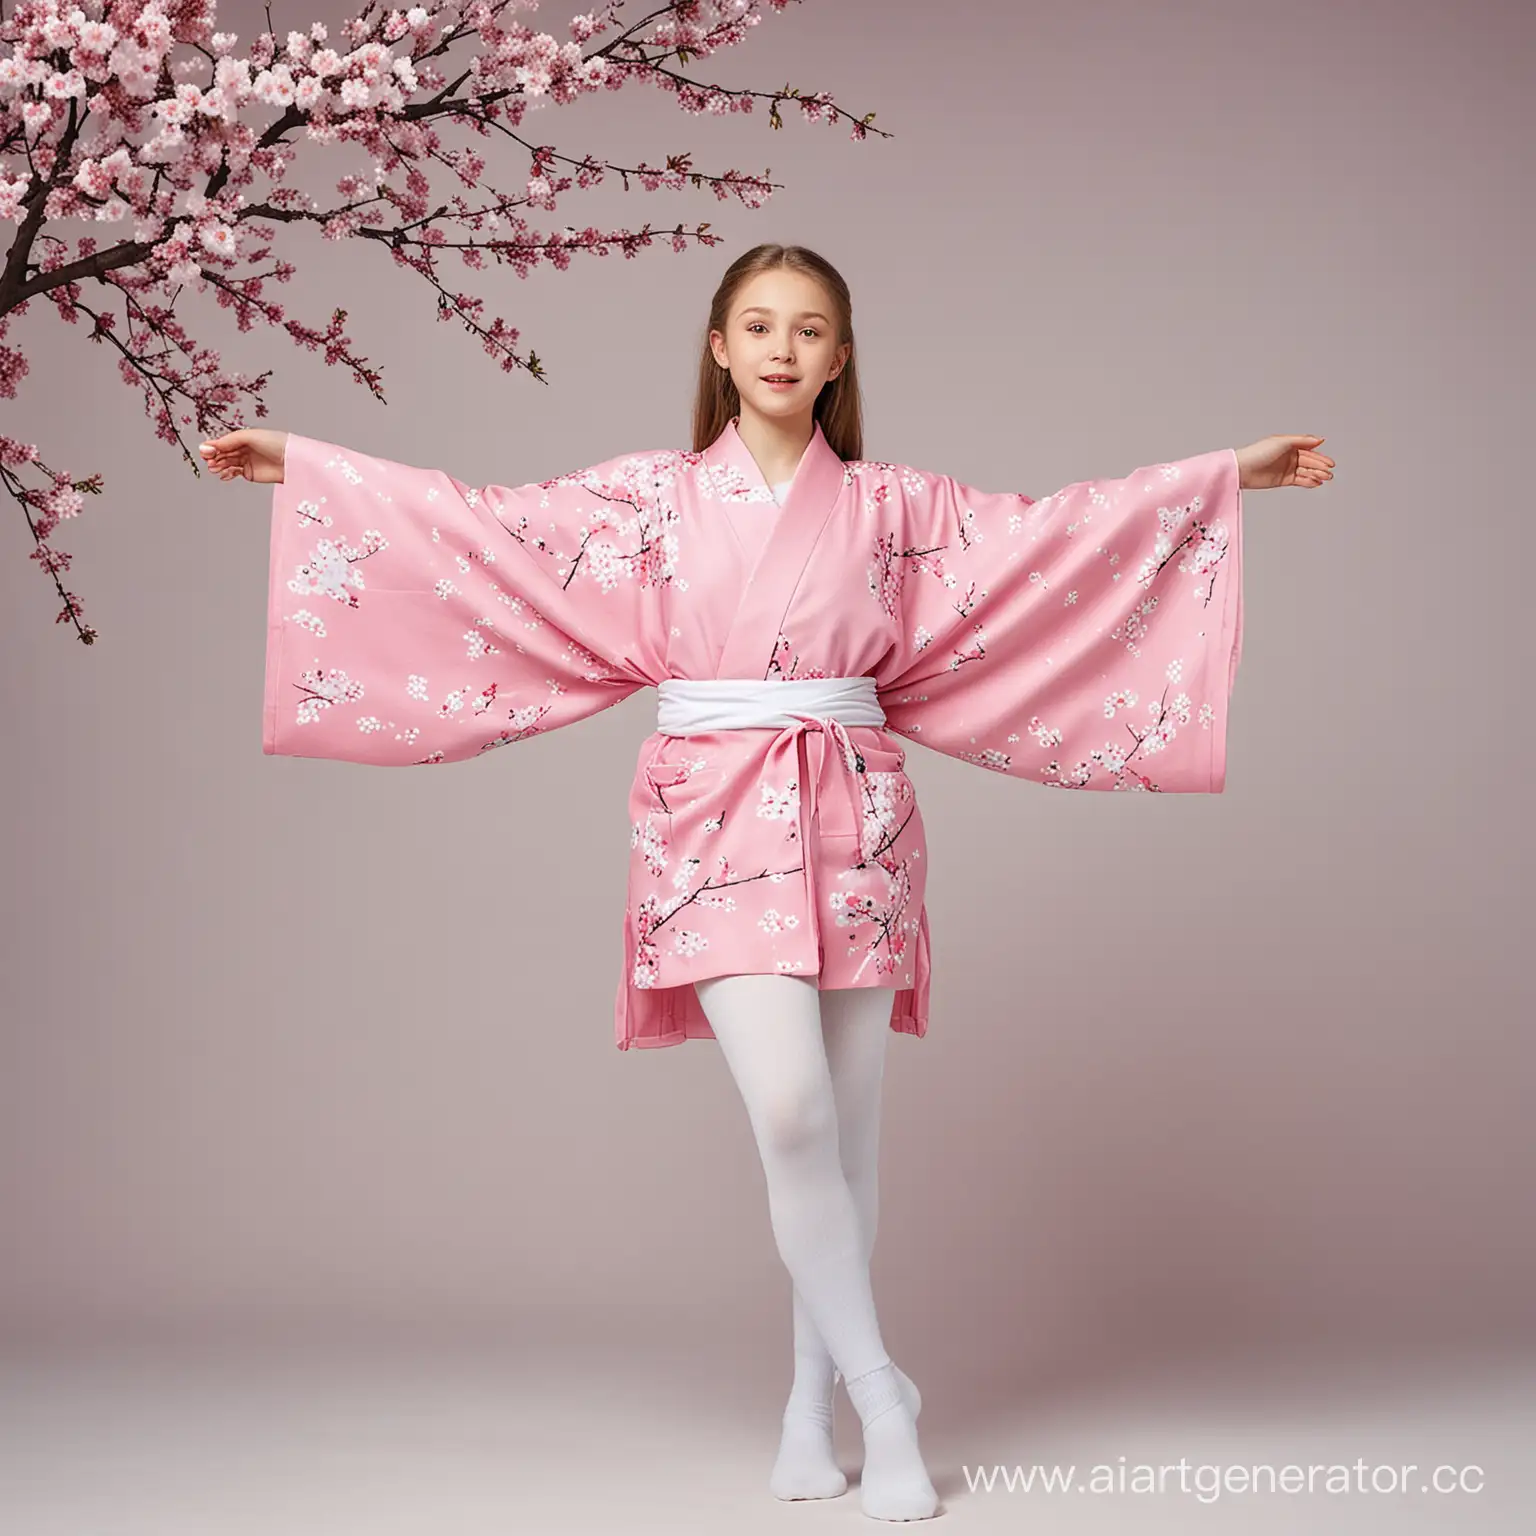 extremely beautiful 13-year-old Russian girl who is more like a European people wears pink and white sakura kimono and pure white socks, clothes float up, full-length photo